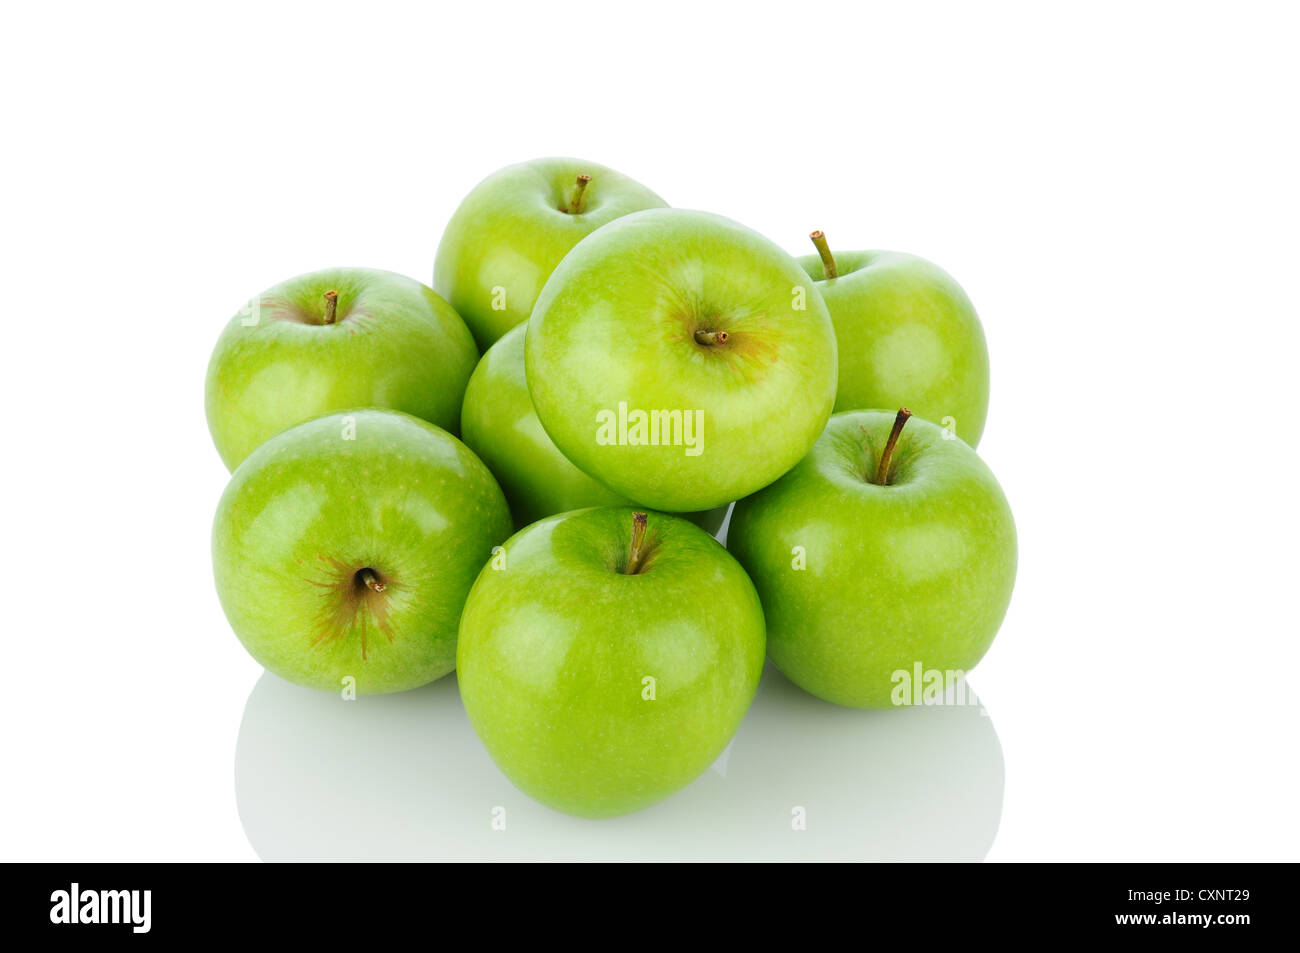 A pile of Granny Smith apples on white with reflection. Horizontal format. Stock Photo